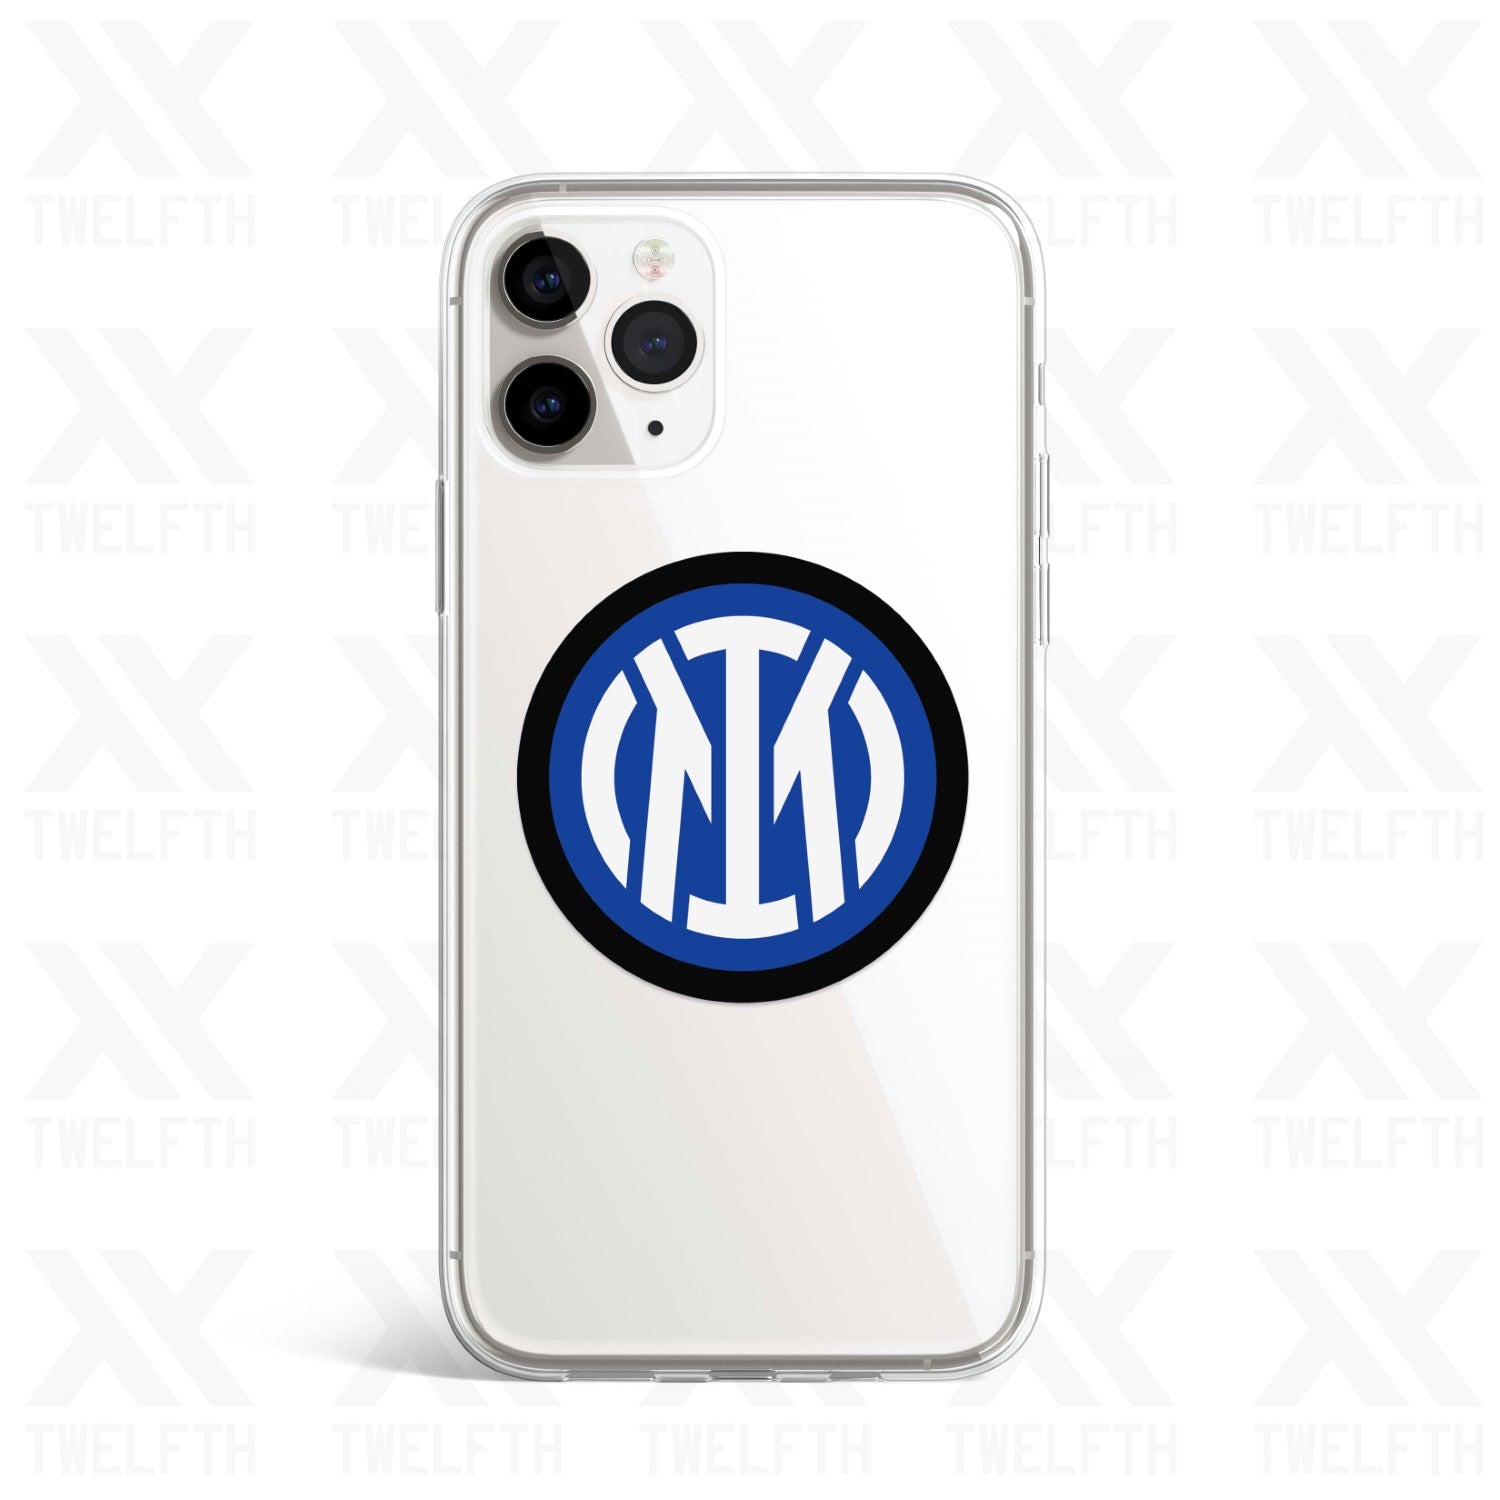 Inter Milan (New) Crest Clear Phone Case